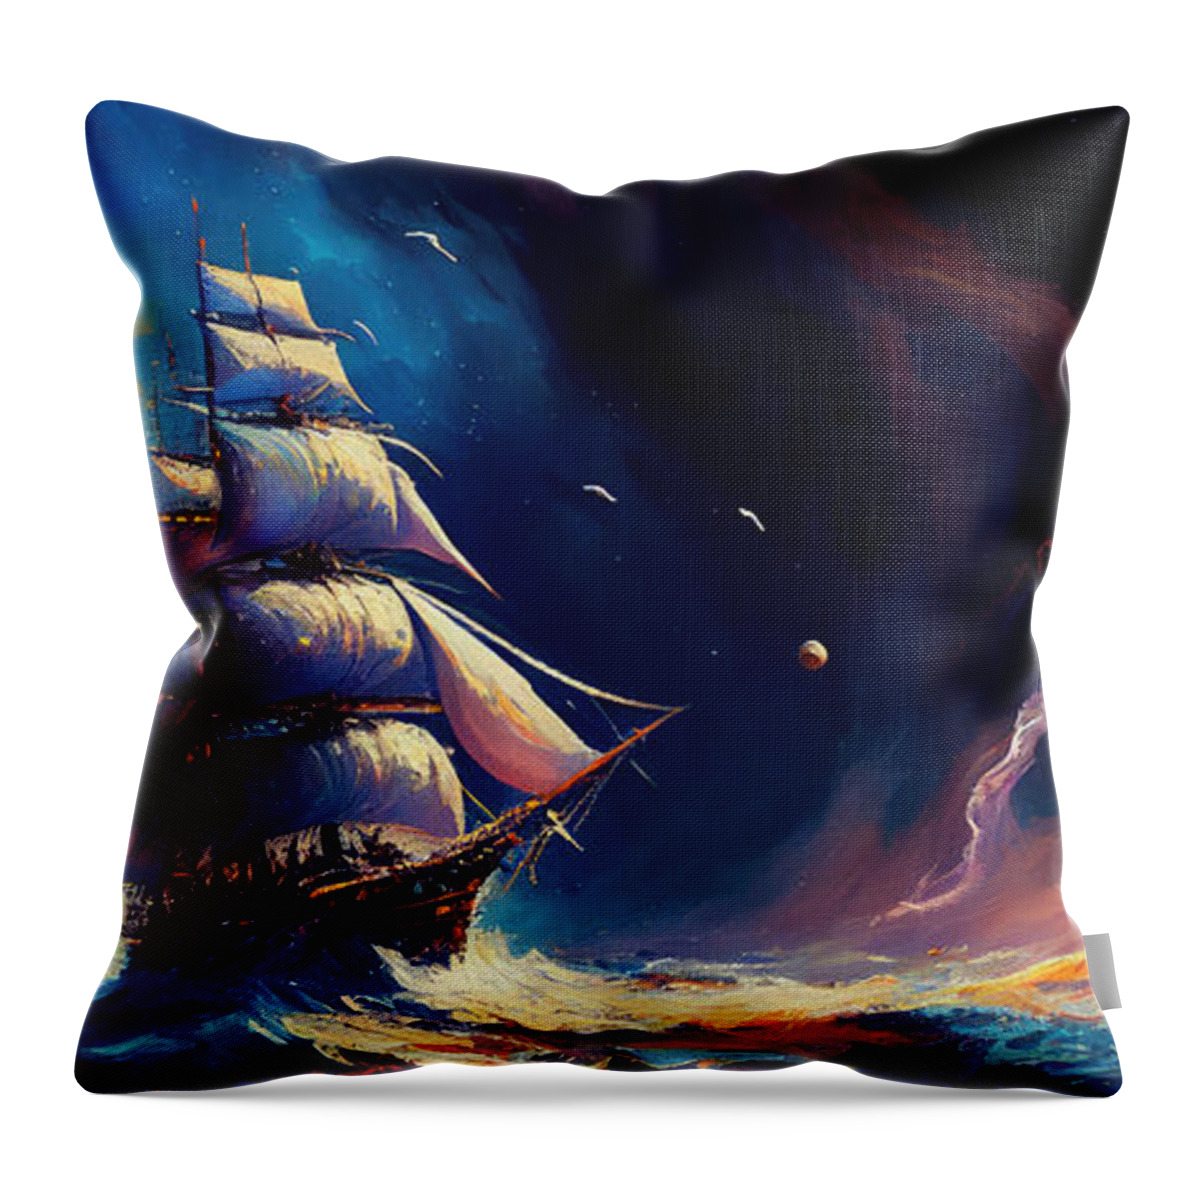 Starship Throw Pillow featuring the painting Starship by My Head Cinema